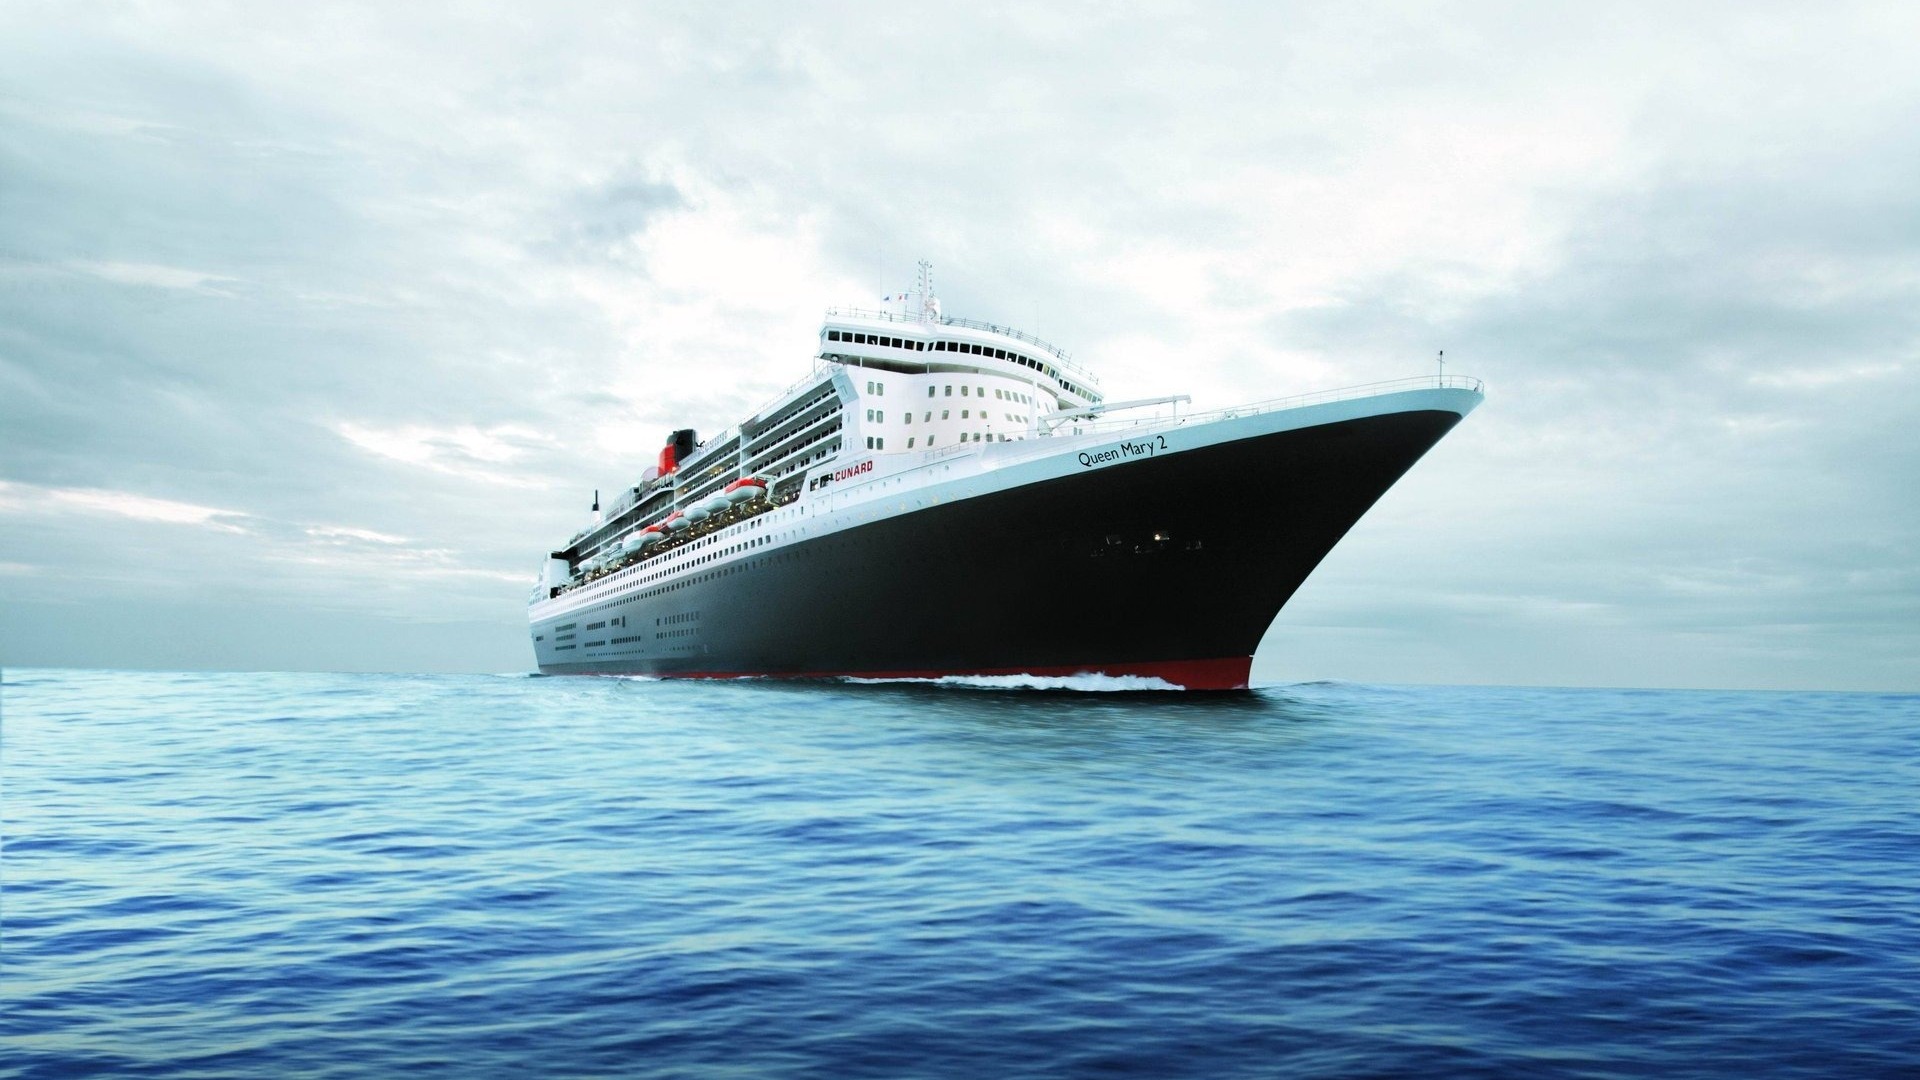 Vehicles RMS Queen Mary 2 HD Wallpaper | Background Image